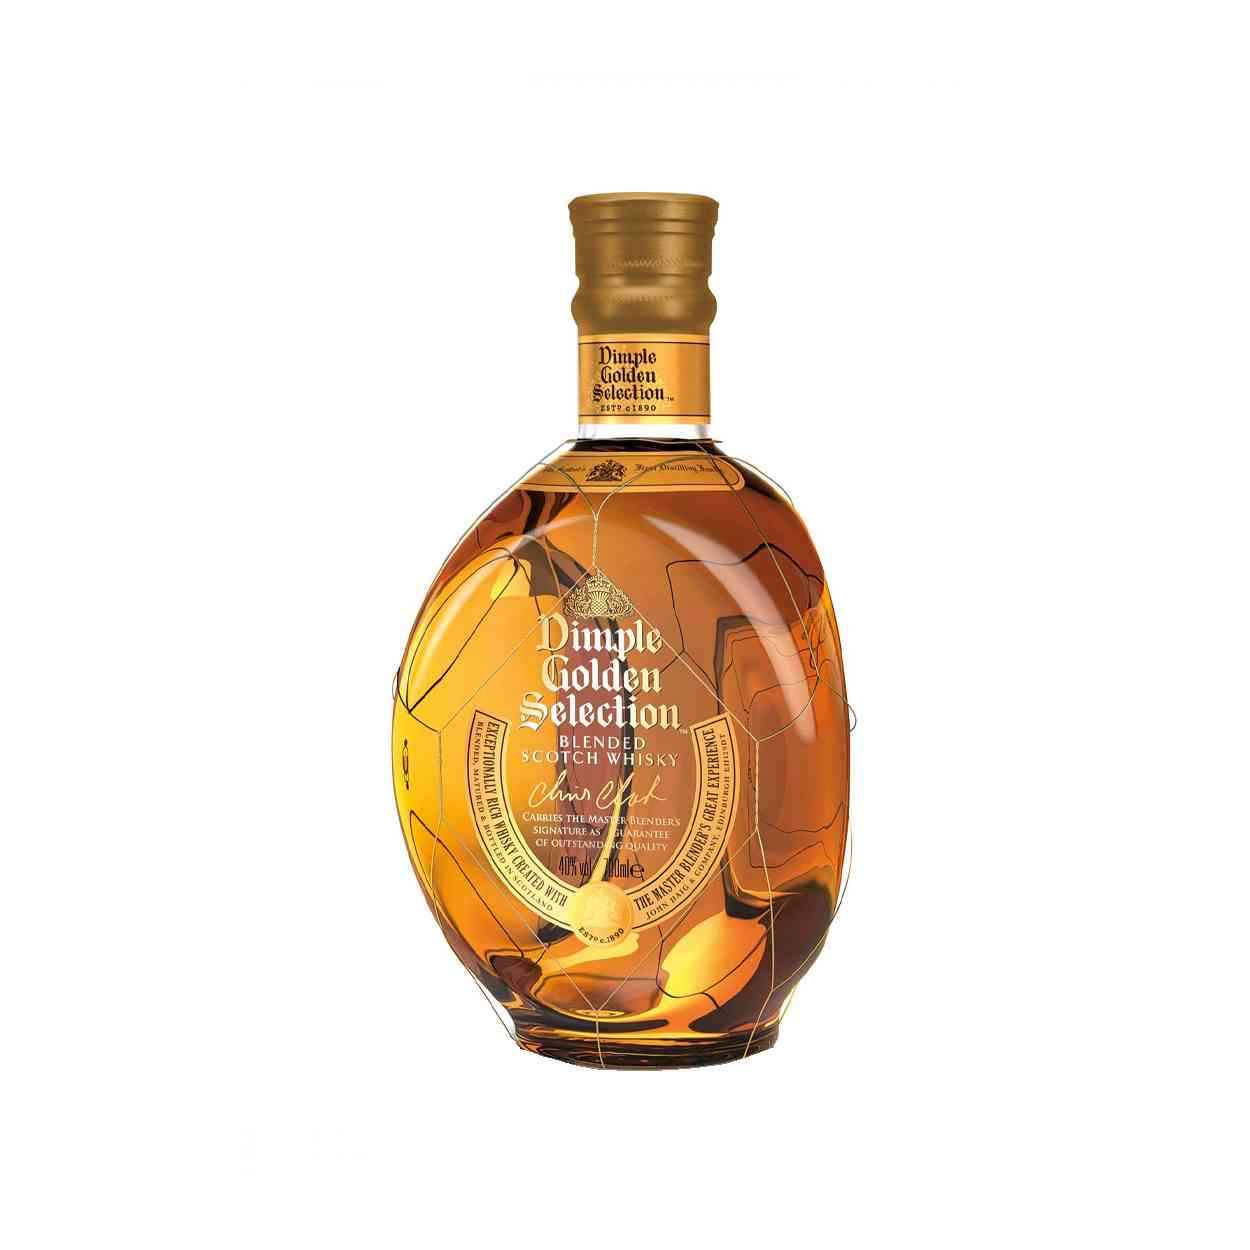 Dimple Gold Selection Whisky